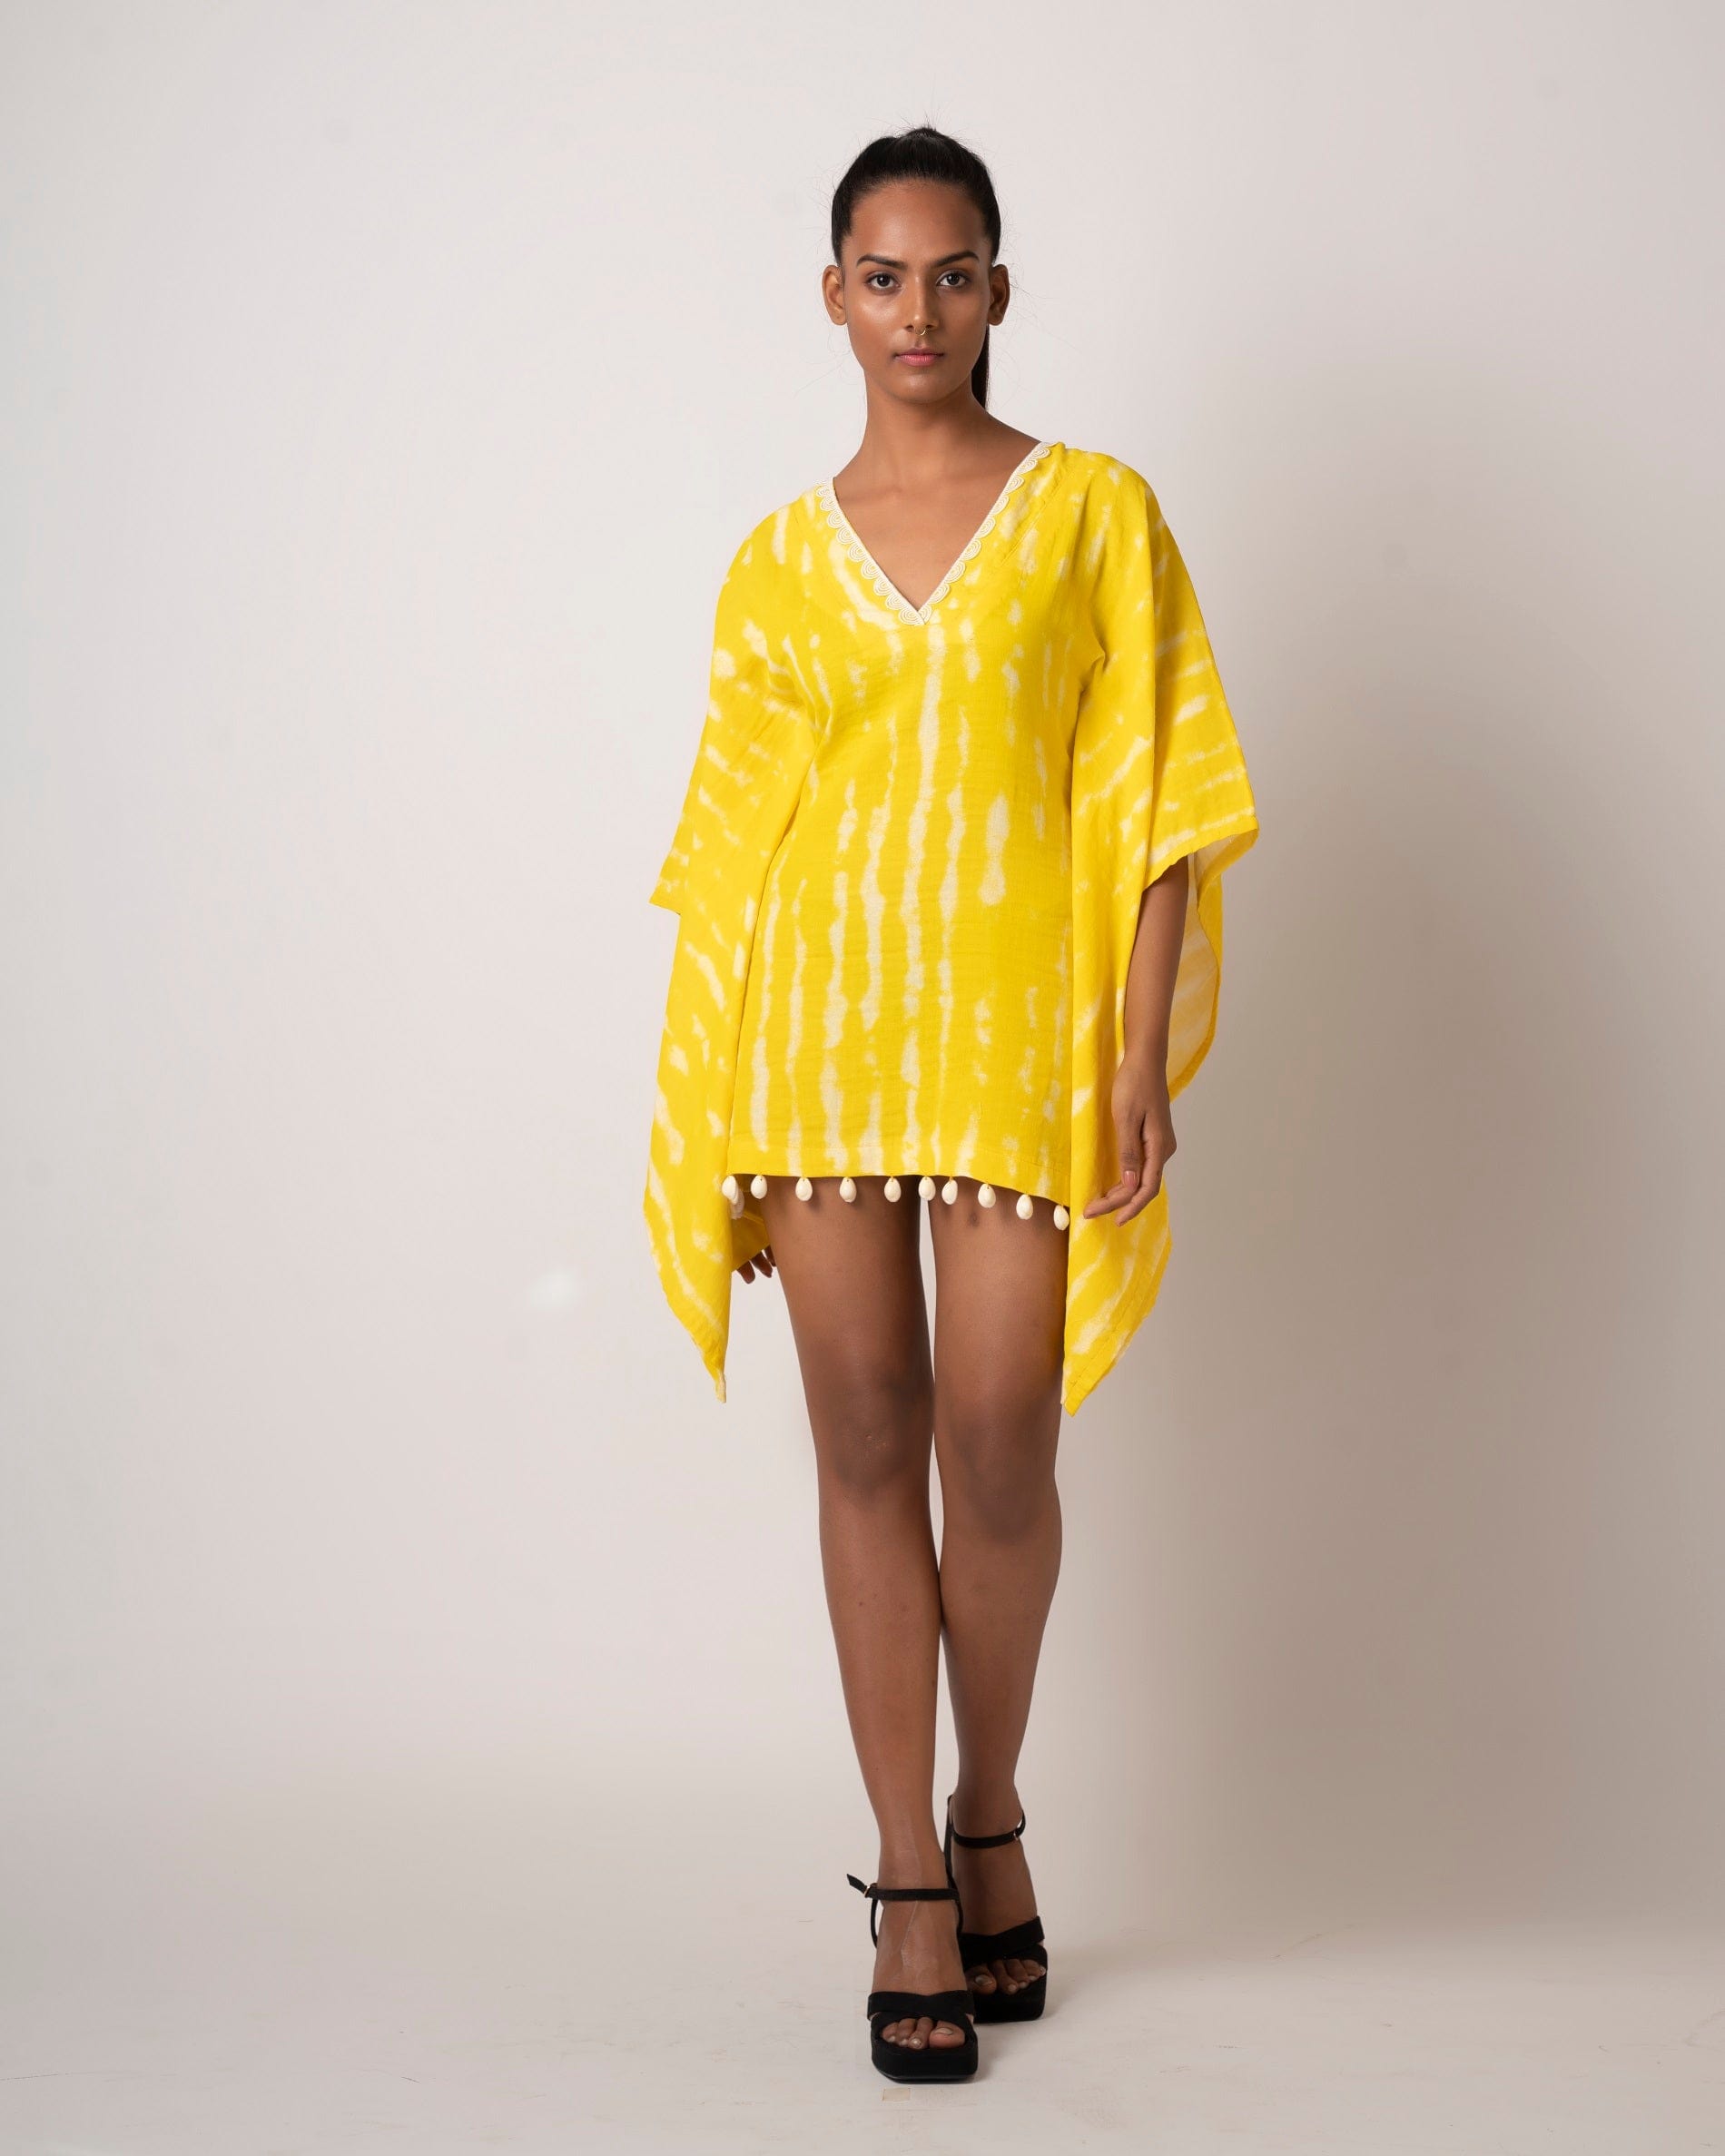 Add a pop of color to your outfit with this vibrant yellow tie-dye short beach dress.  It comes with kimono-style sleeves, yoke collar, and lace detailing and is perfect as a beach vacation dress or for a casual day out.